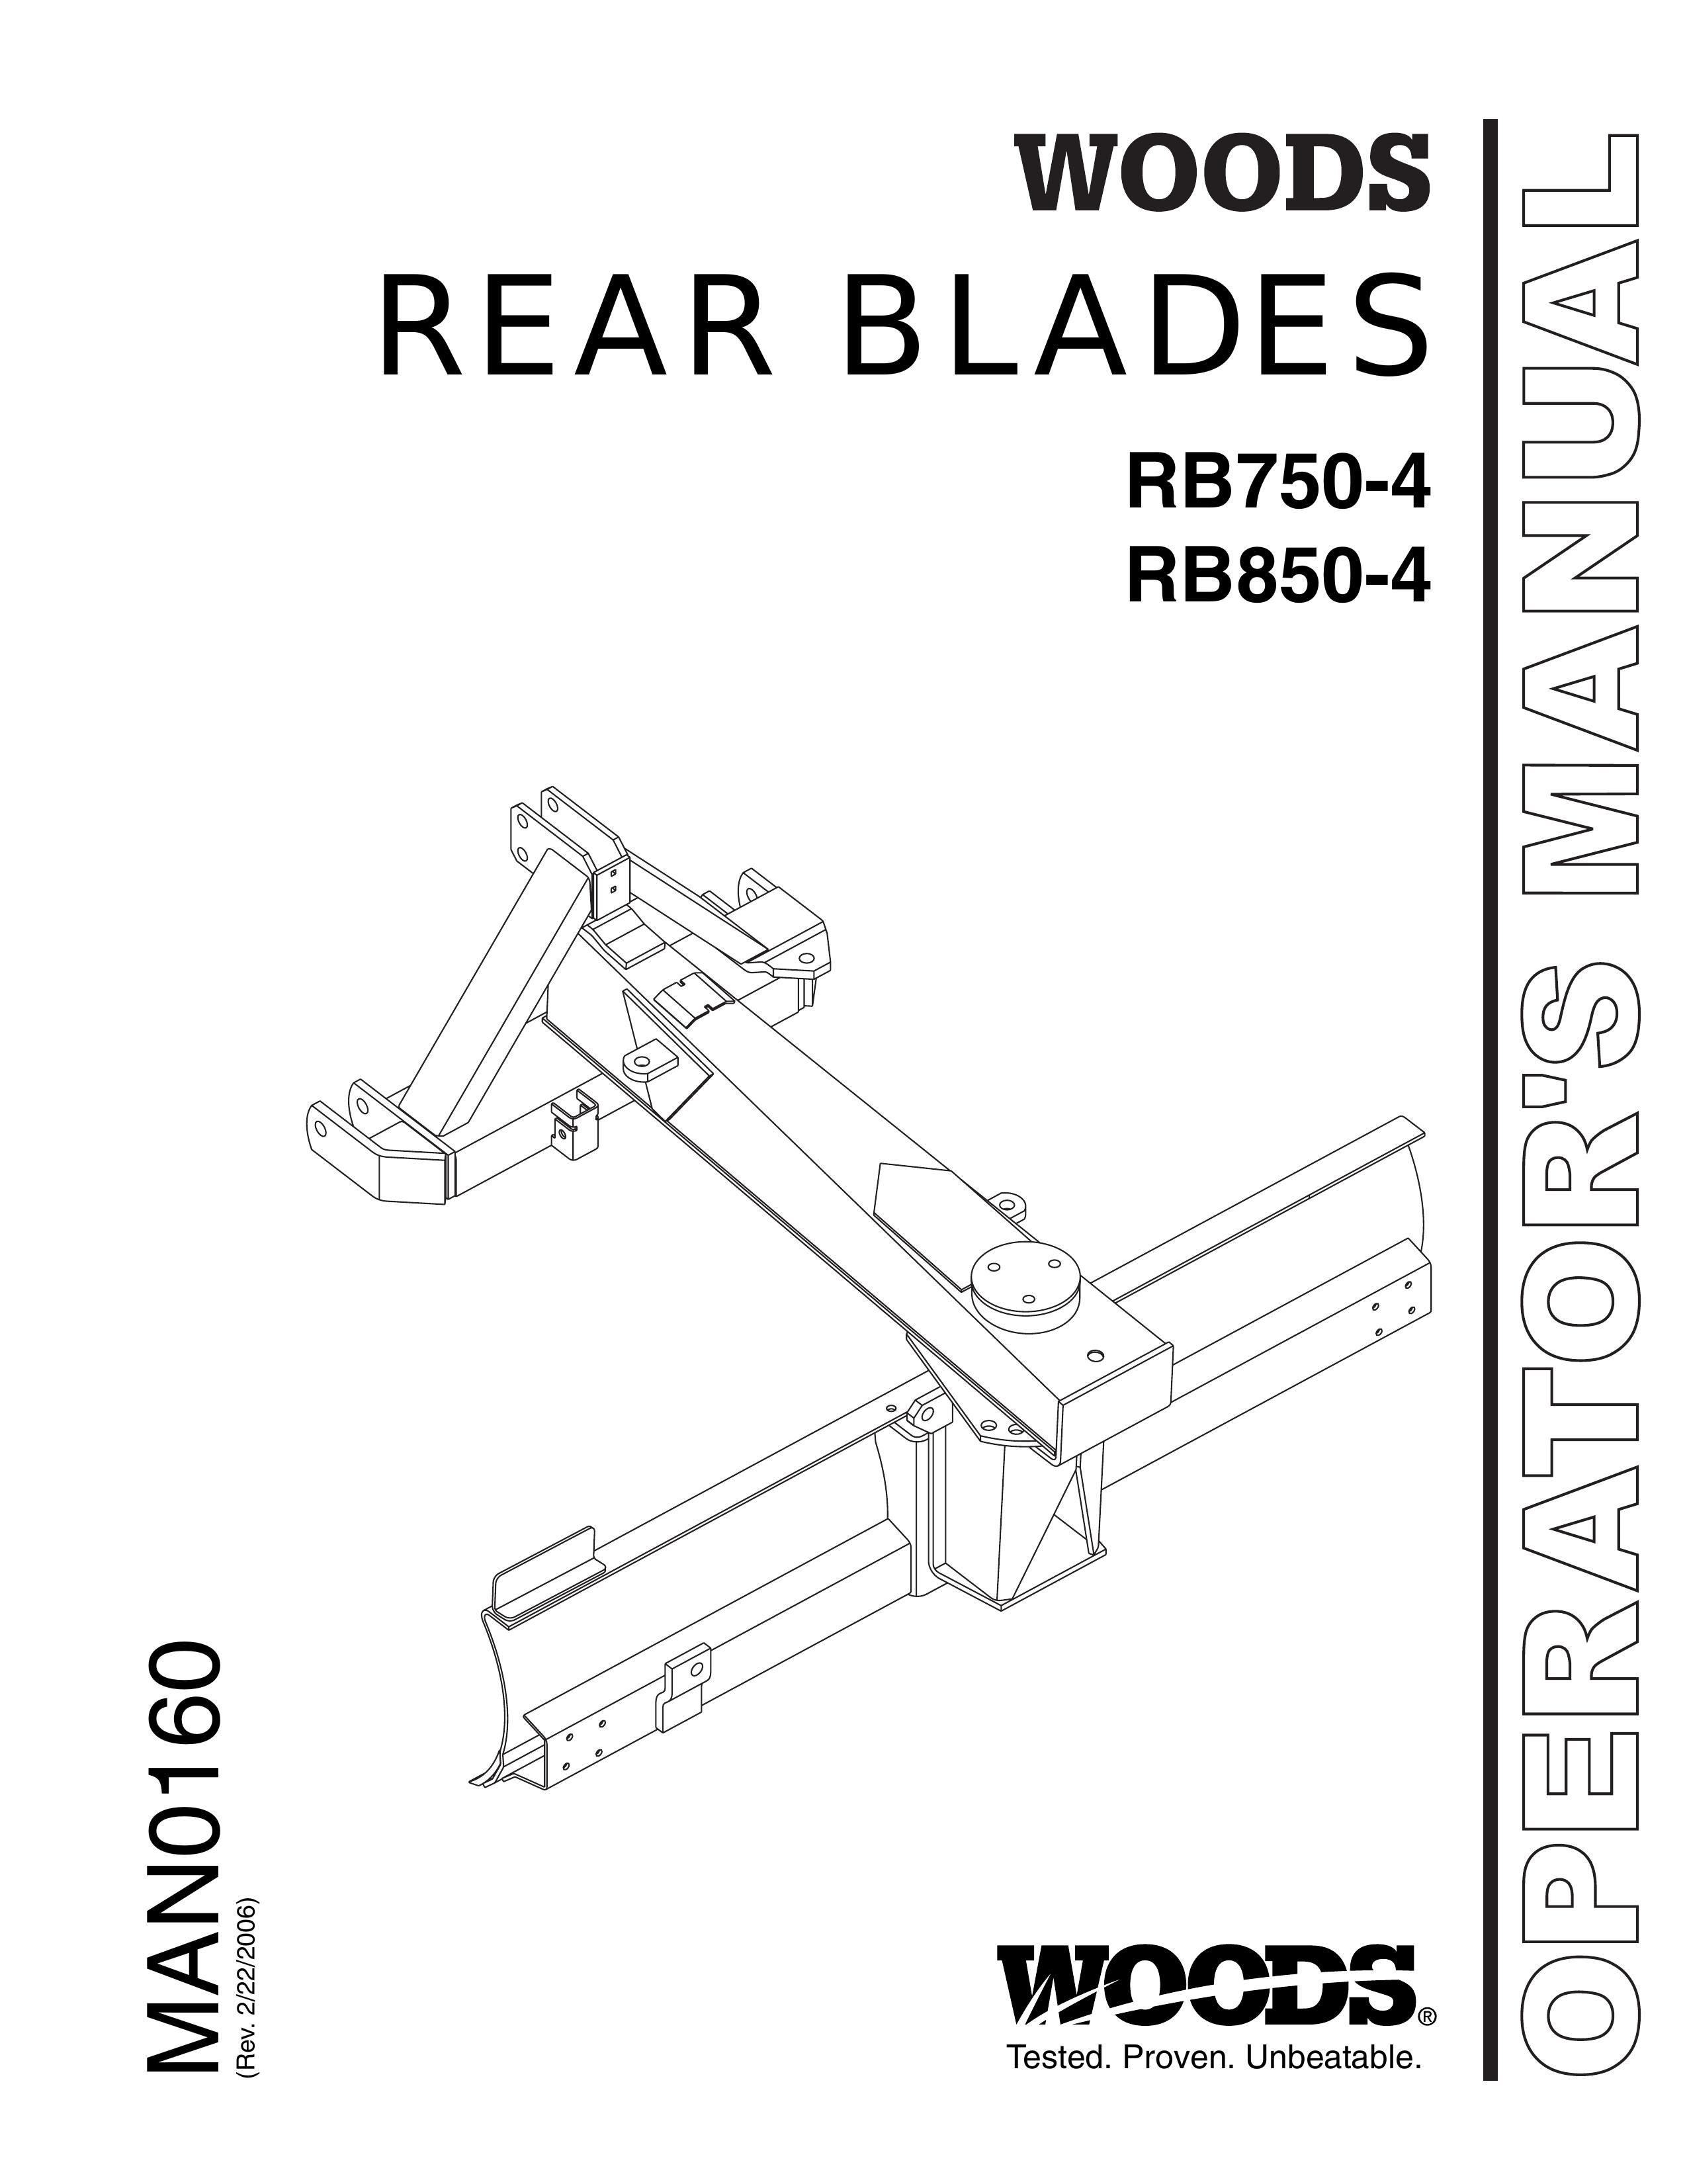 Woods Equipment RB850-4 Lawn Mower Accessory User Manual